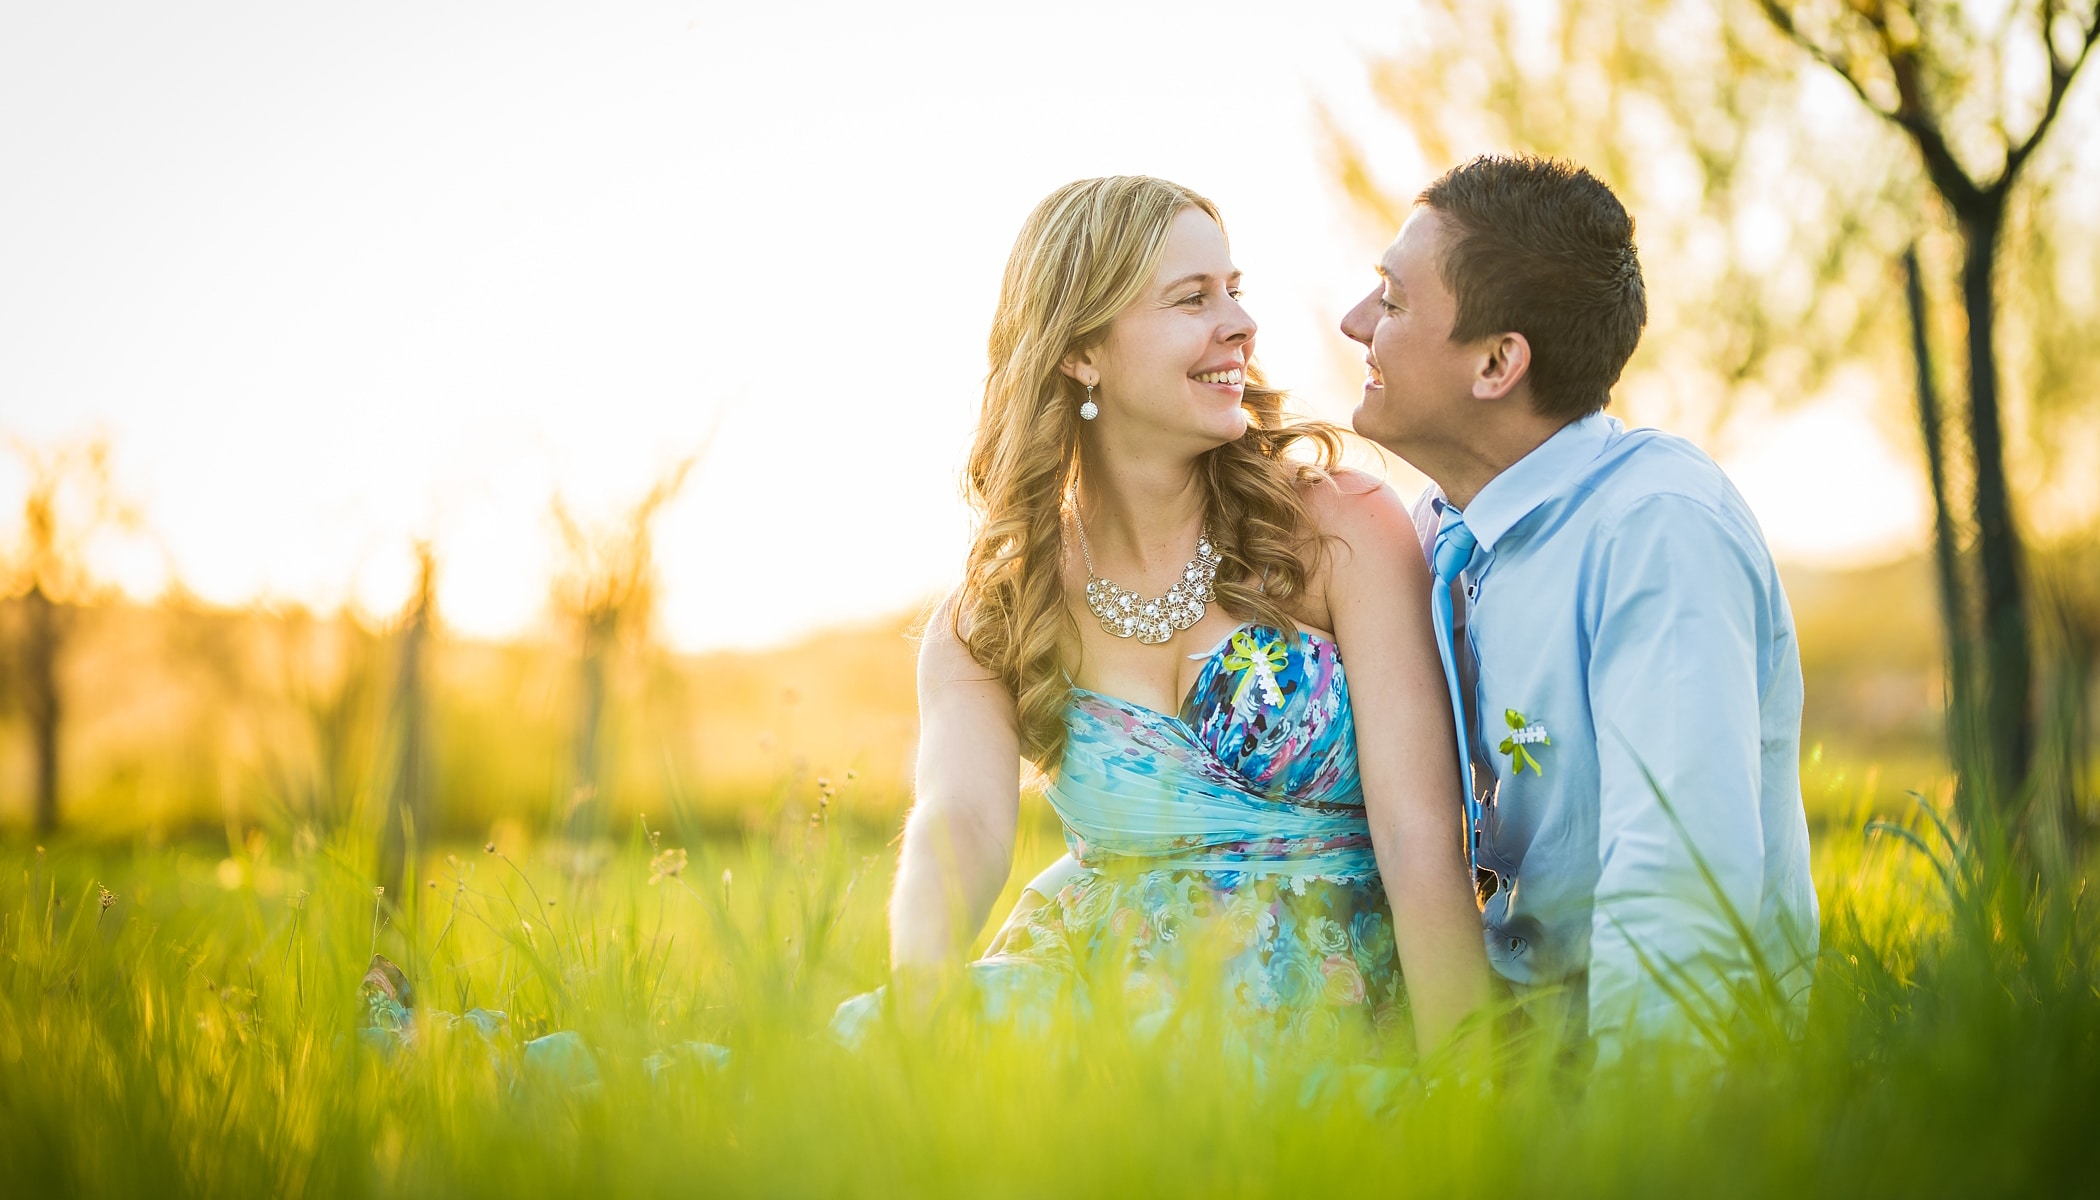 How to do a Couples Photoshoot: Romance, Coordinated Colors, and Smiles